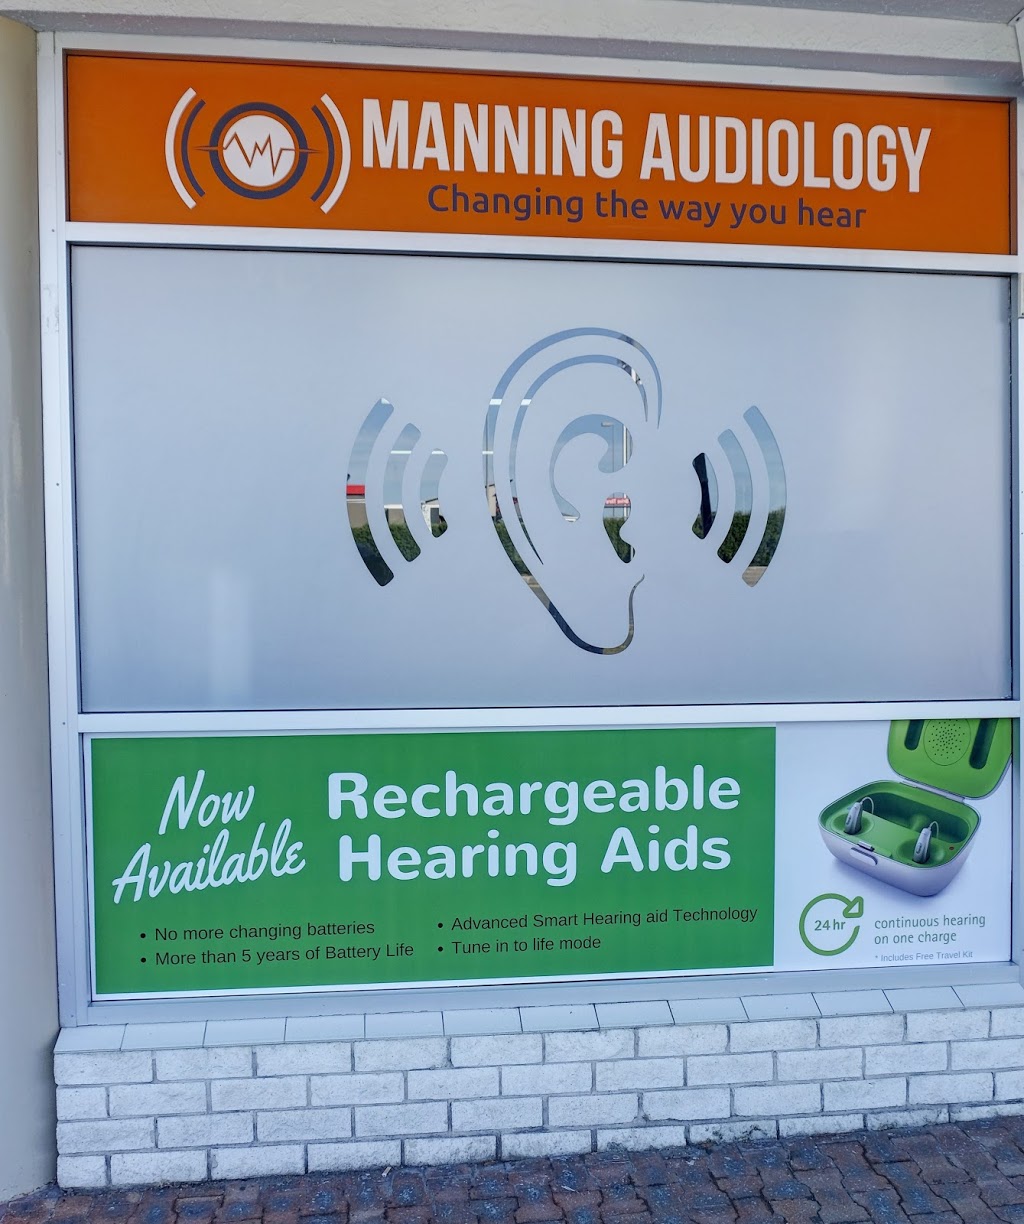 Manning Audiology Tuncurry | doctor | 3/11 Manning St, Tuncurry NSW 2428, Australia | 0265552442 OR +61 2 6555 2442